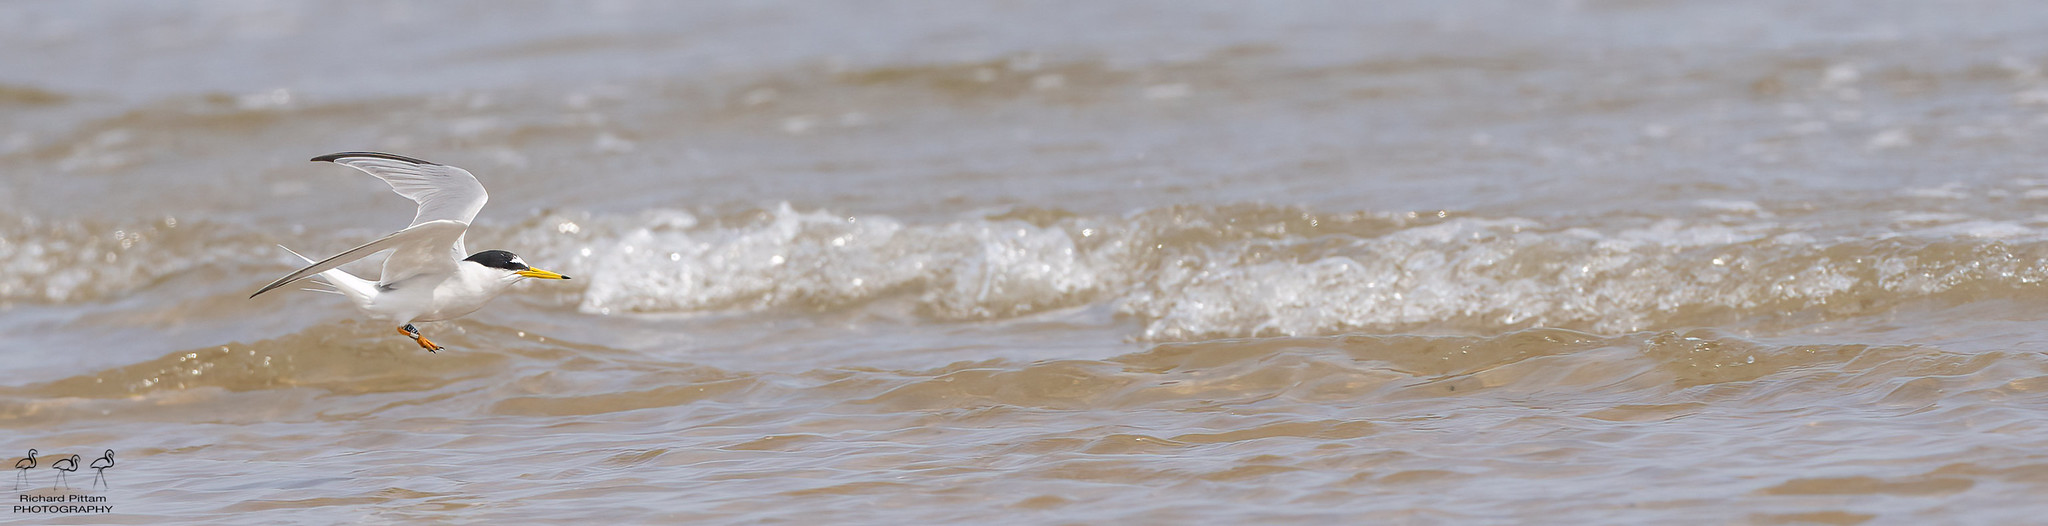 Little Tern - unfortunately as electricity and water don't mix - neither does photography and 30DegC  temperatures :-(